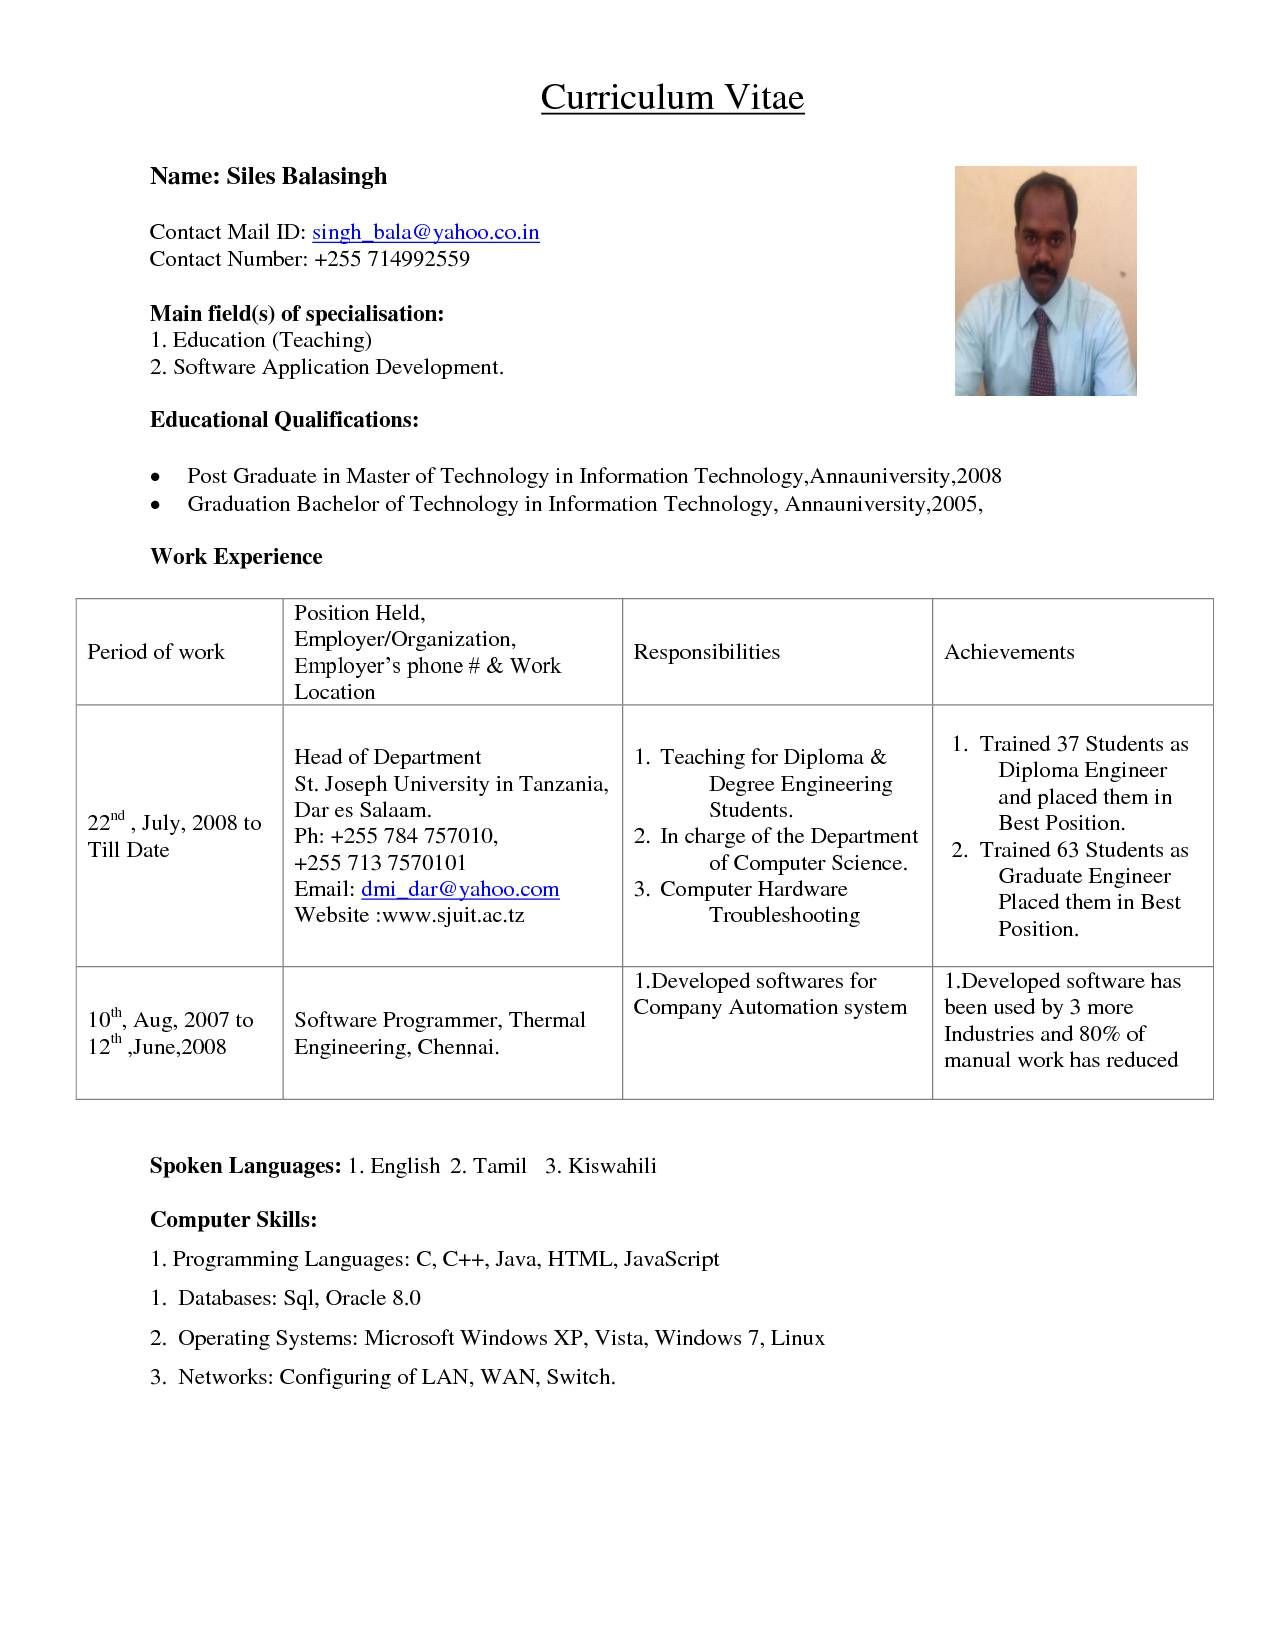 Sample Resume for Lecturer In Engineering College Resume format for Lecturer Job In Engineering College